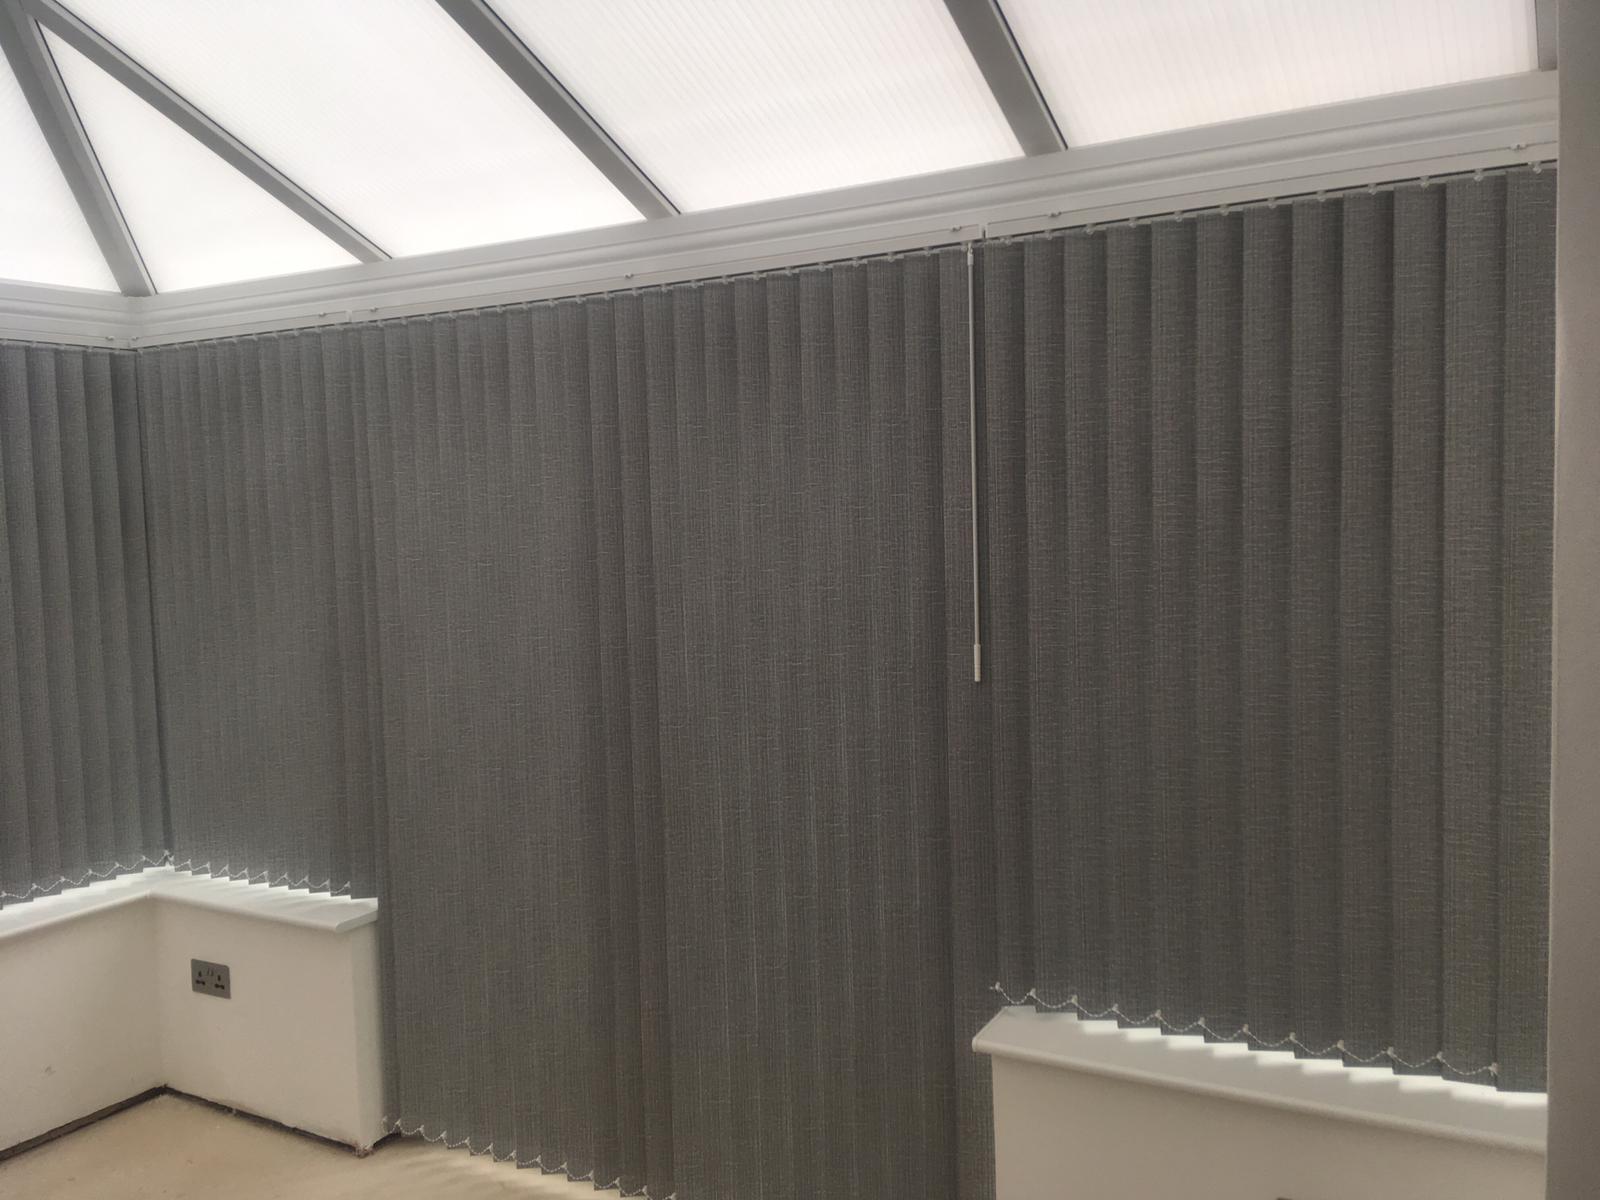 Suppliers of Customizable Vertical Blinds Designs UK